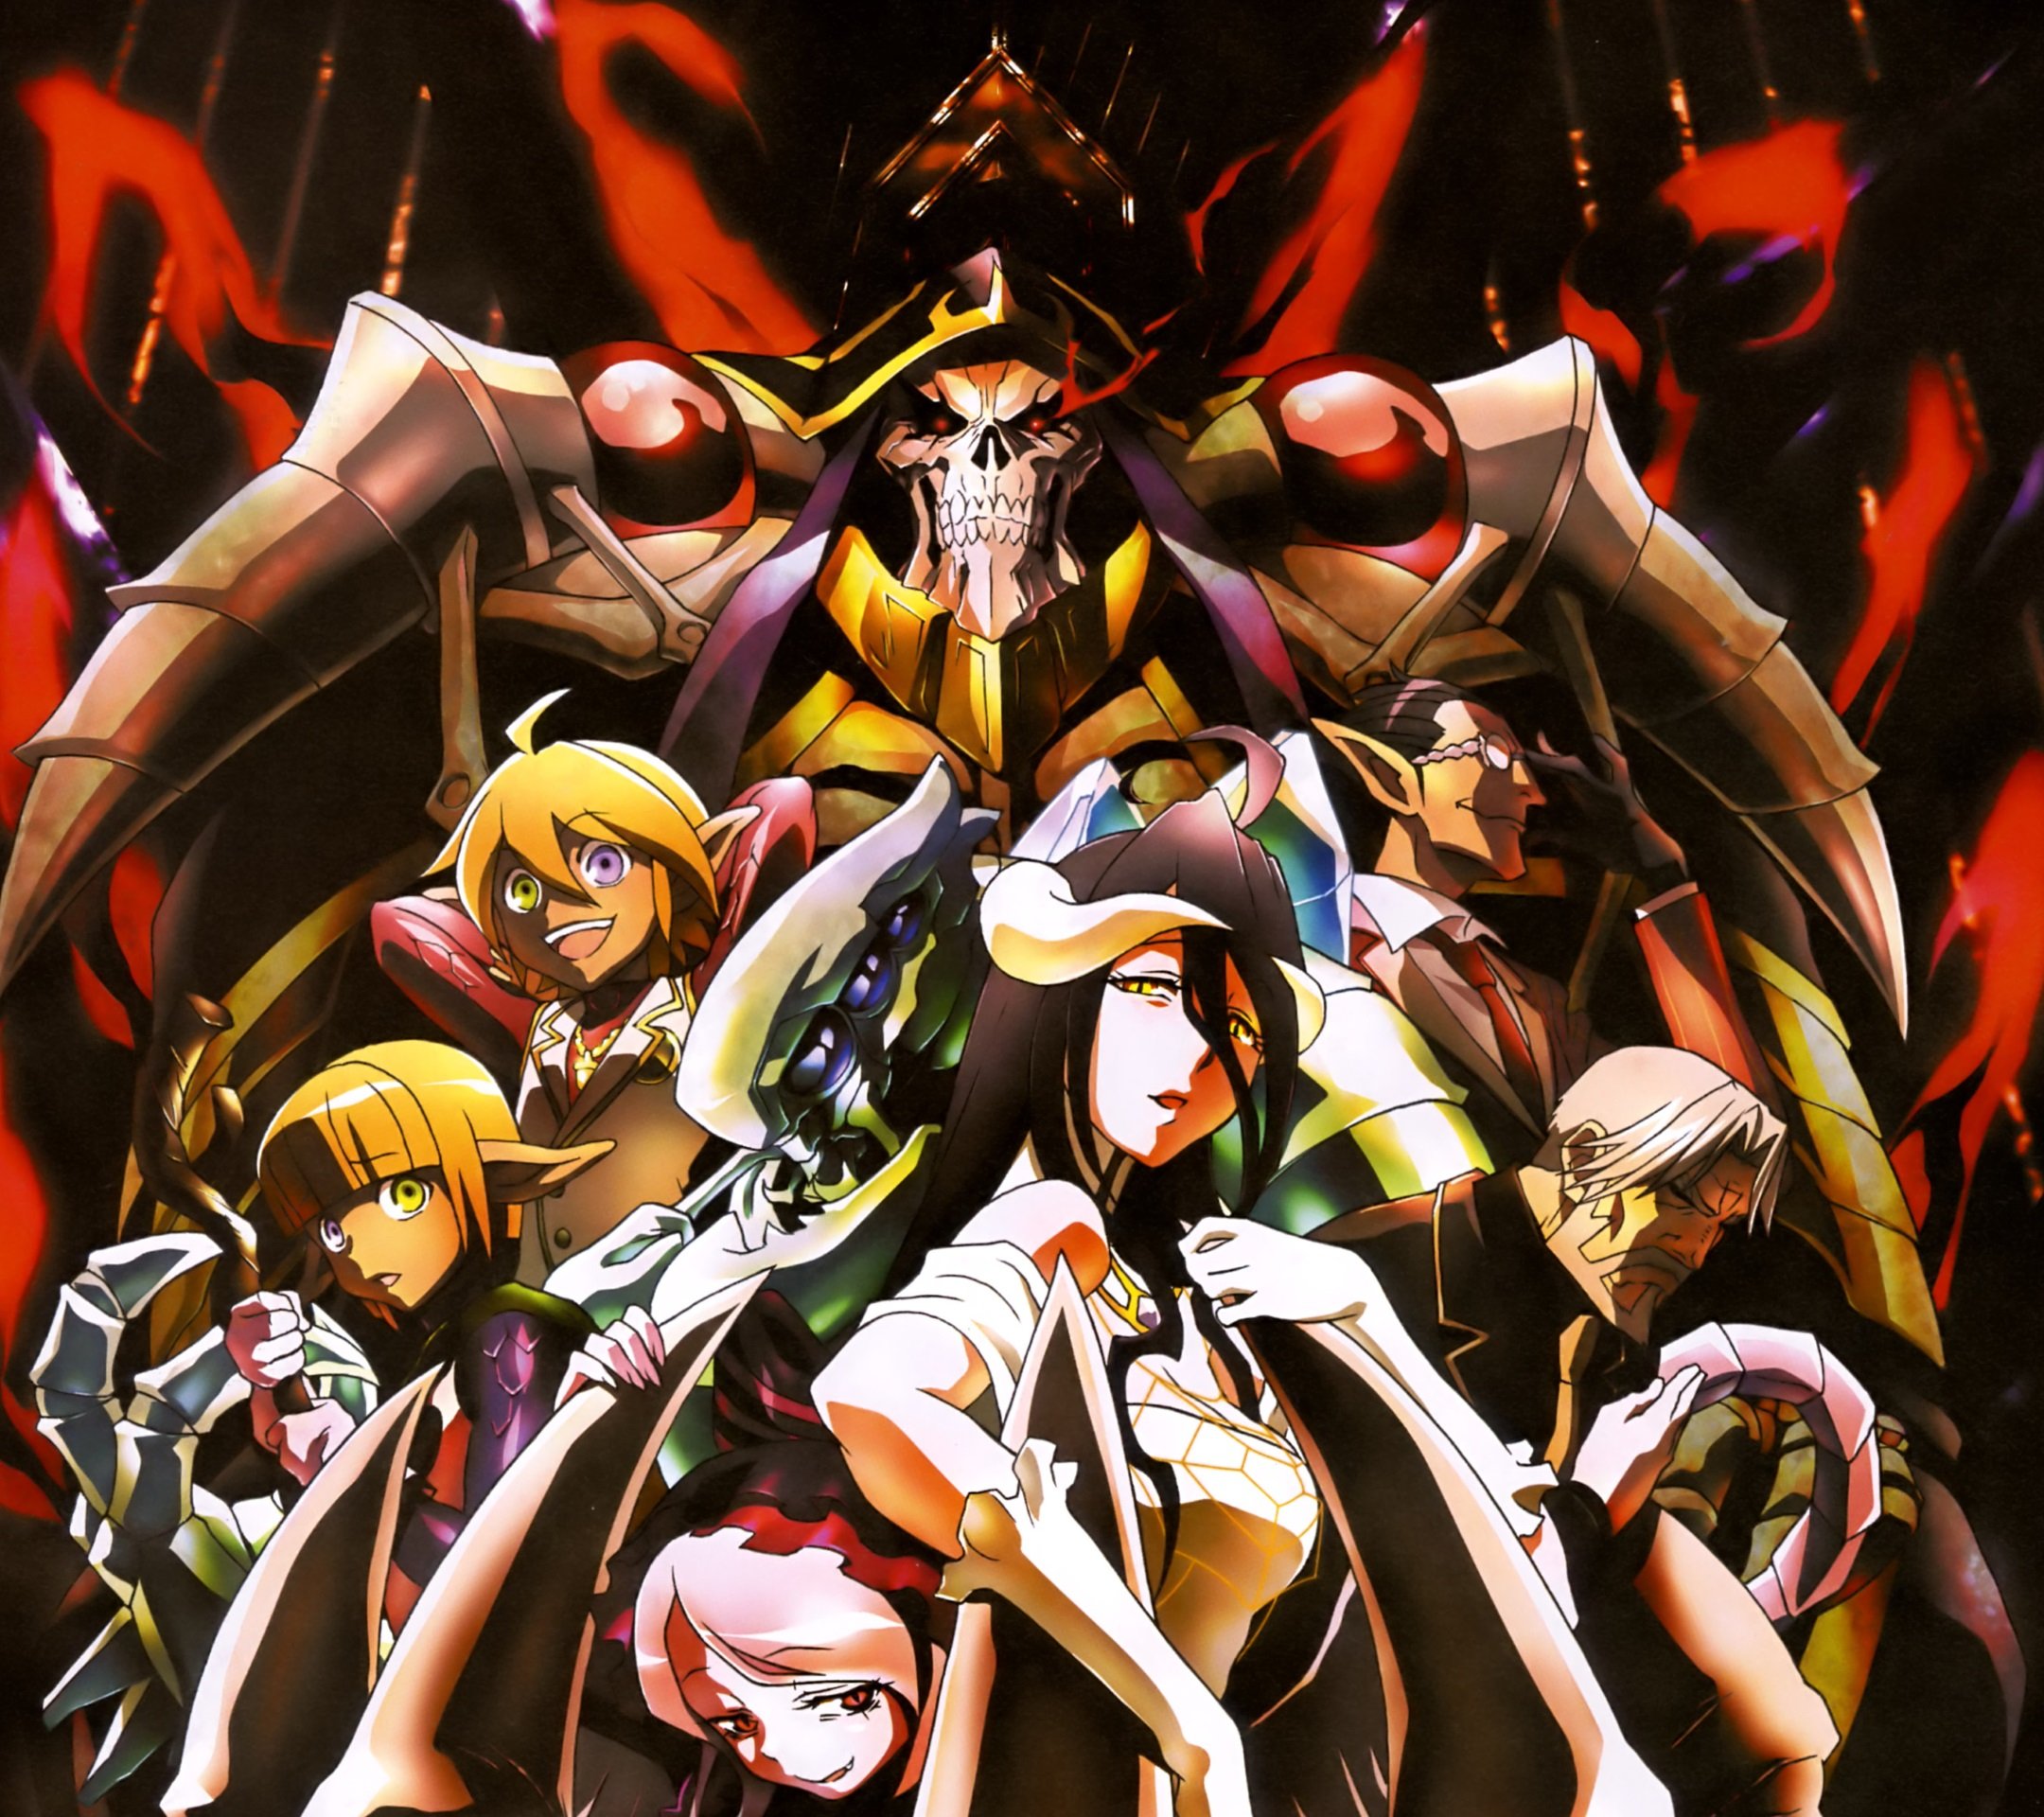 Free Download Overlord Anime Wallpapers For Smartphones 2160x1920 For Your Desktop Mobile Tablet Explore 49 Albedo Overlord Wallpaper Overlord Anime Wallpaper Overlord Anime Albedo Wallpaper